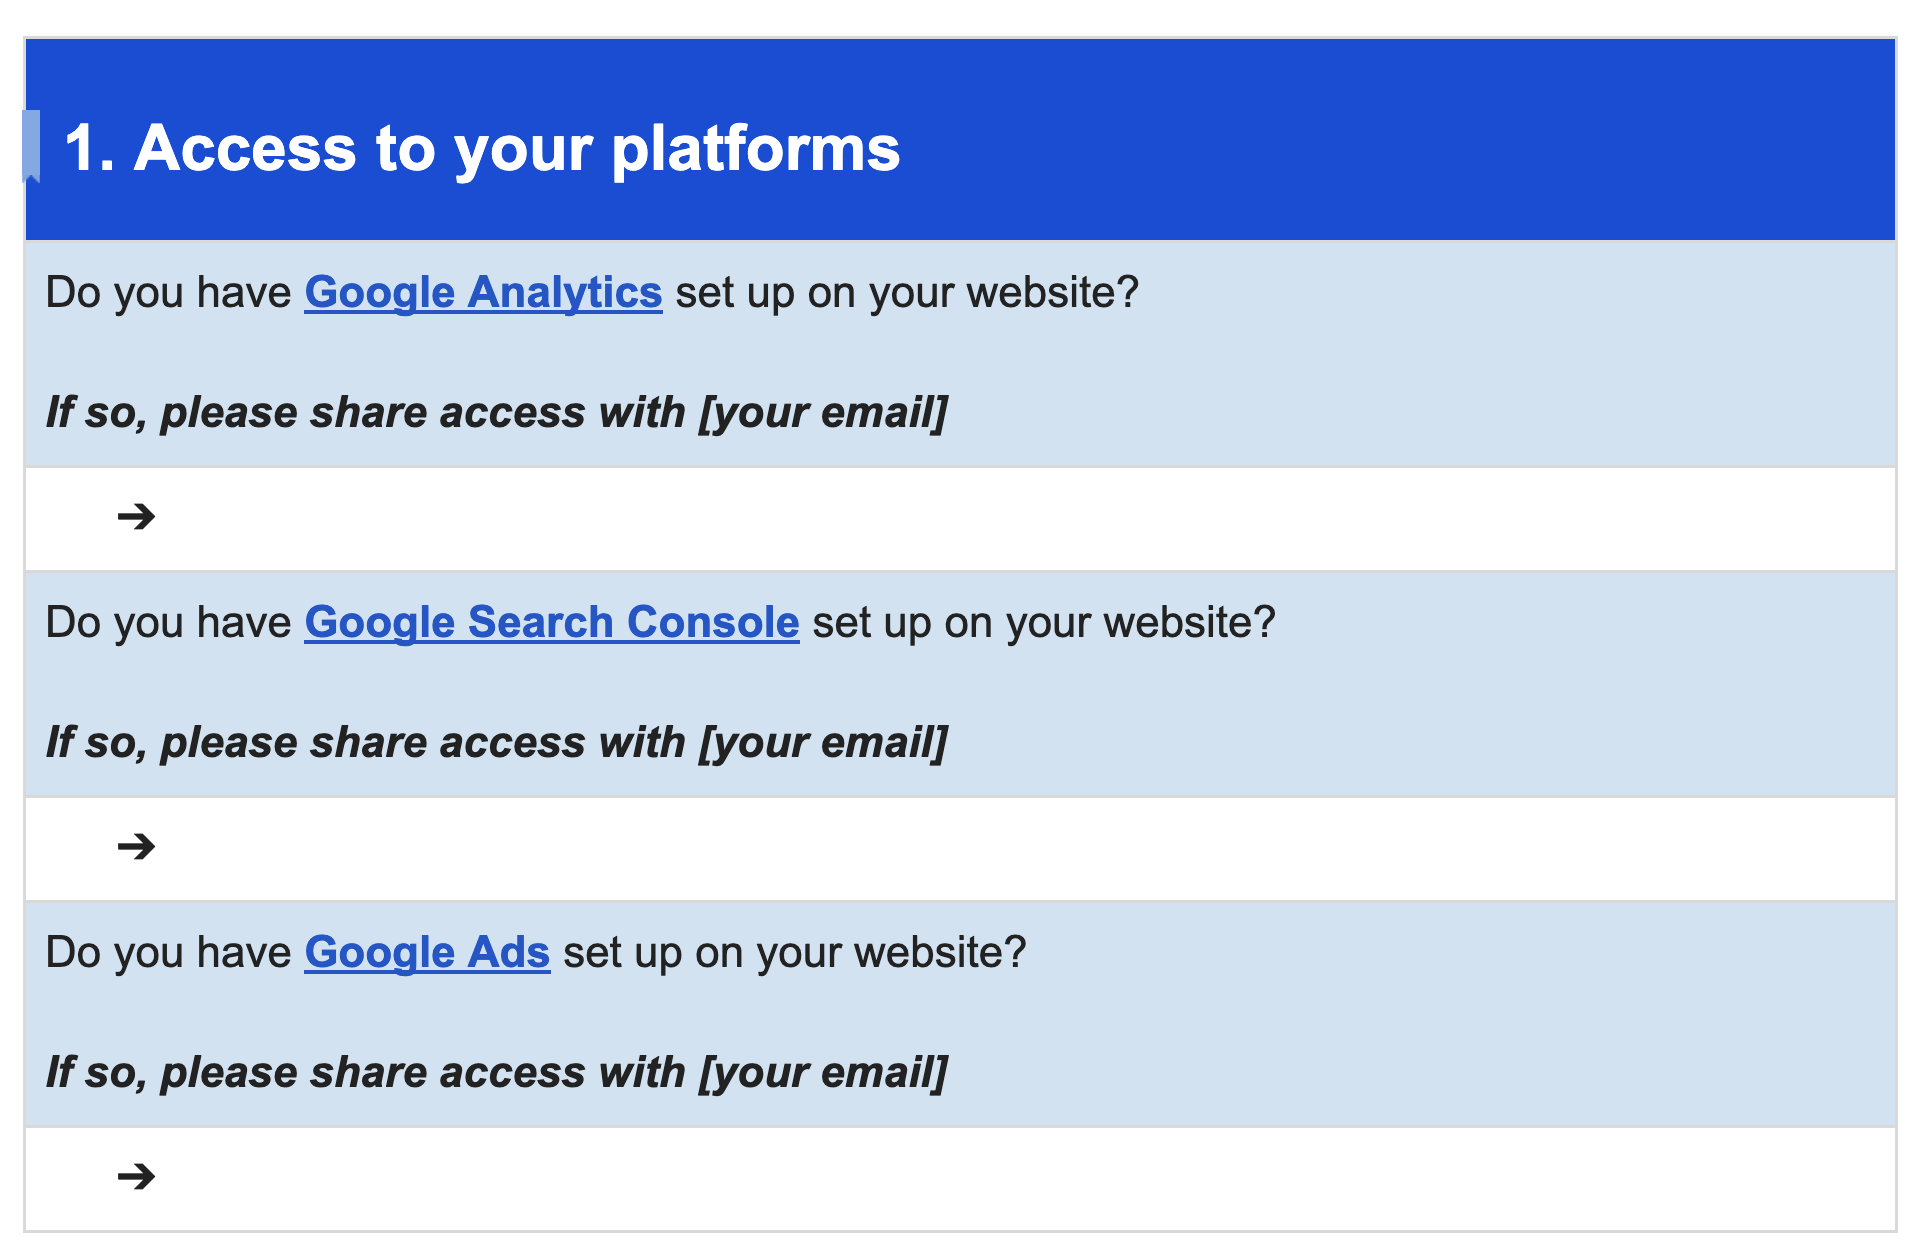 Getting access to platform questions